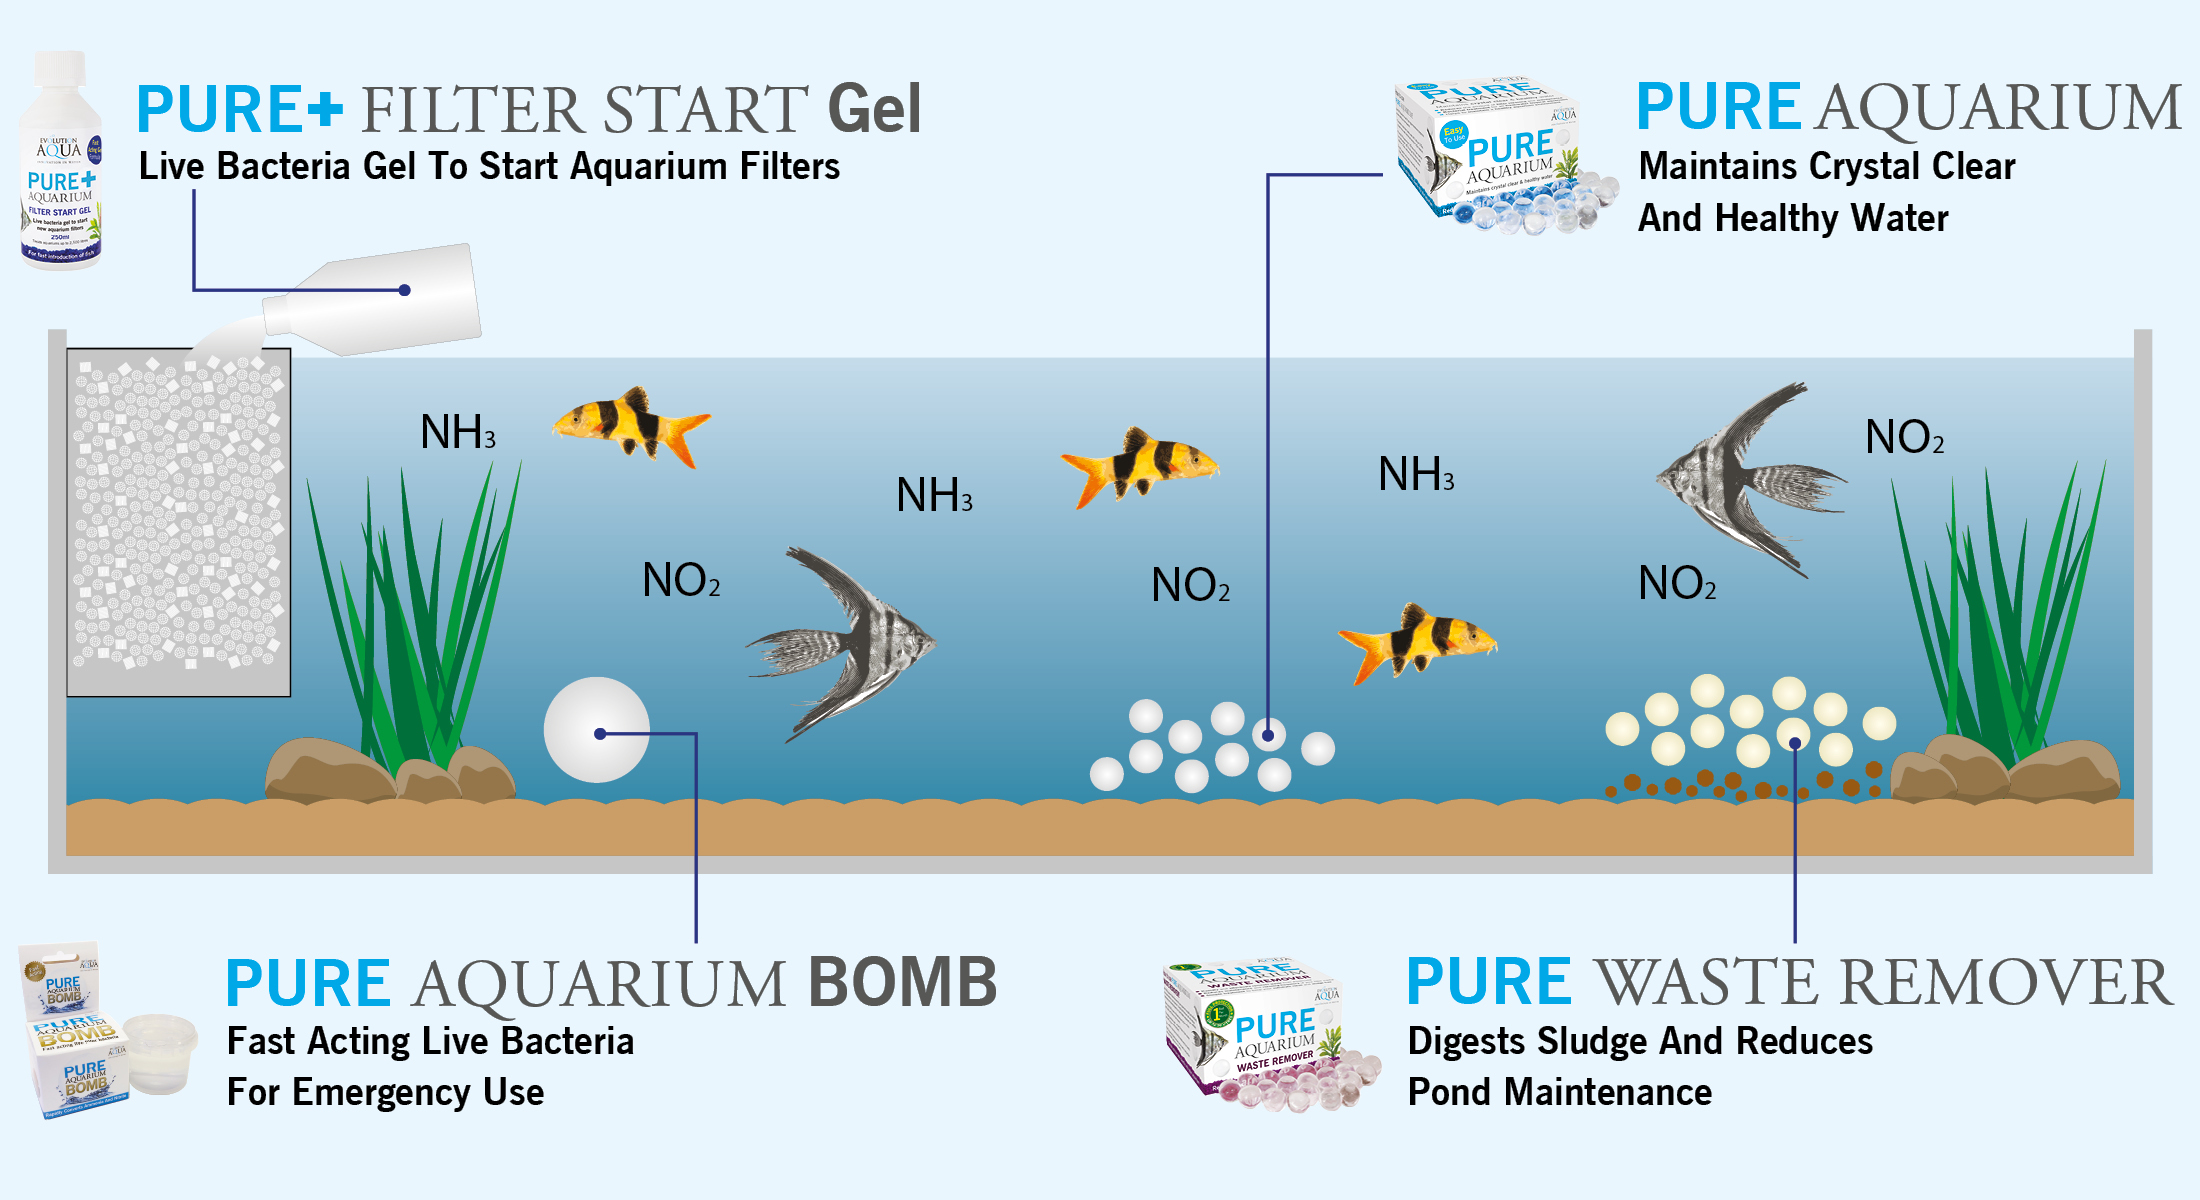 Where to use Pure Aquarium products